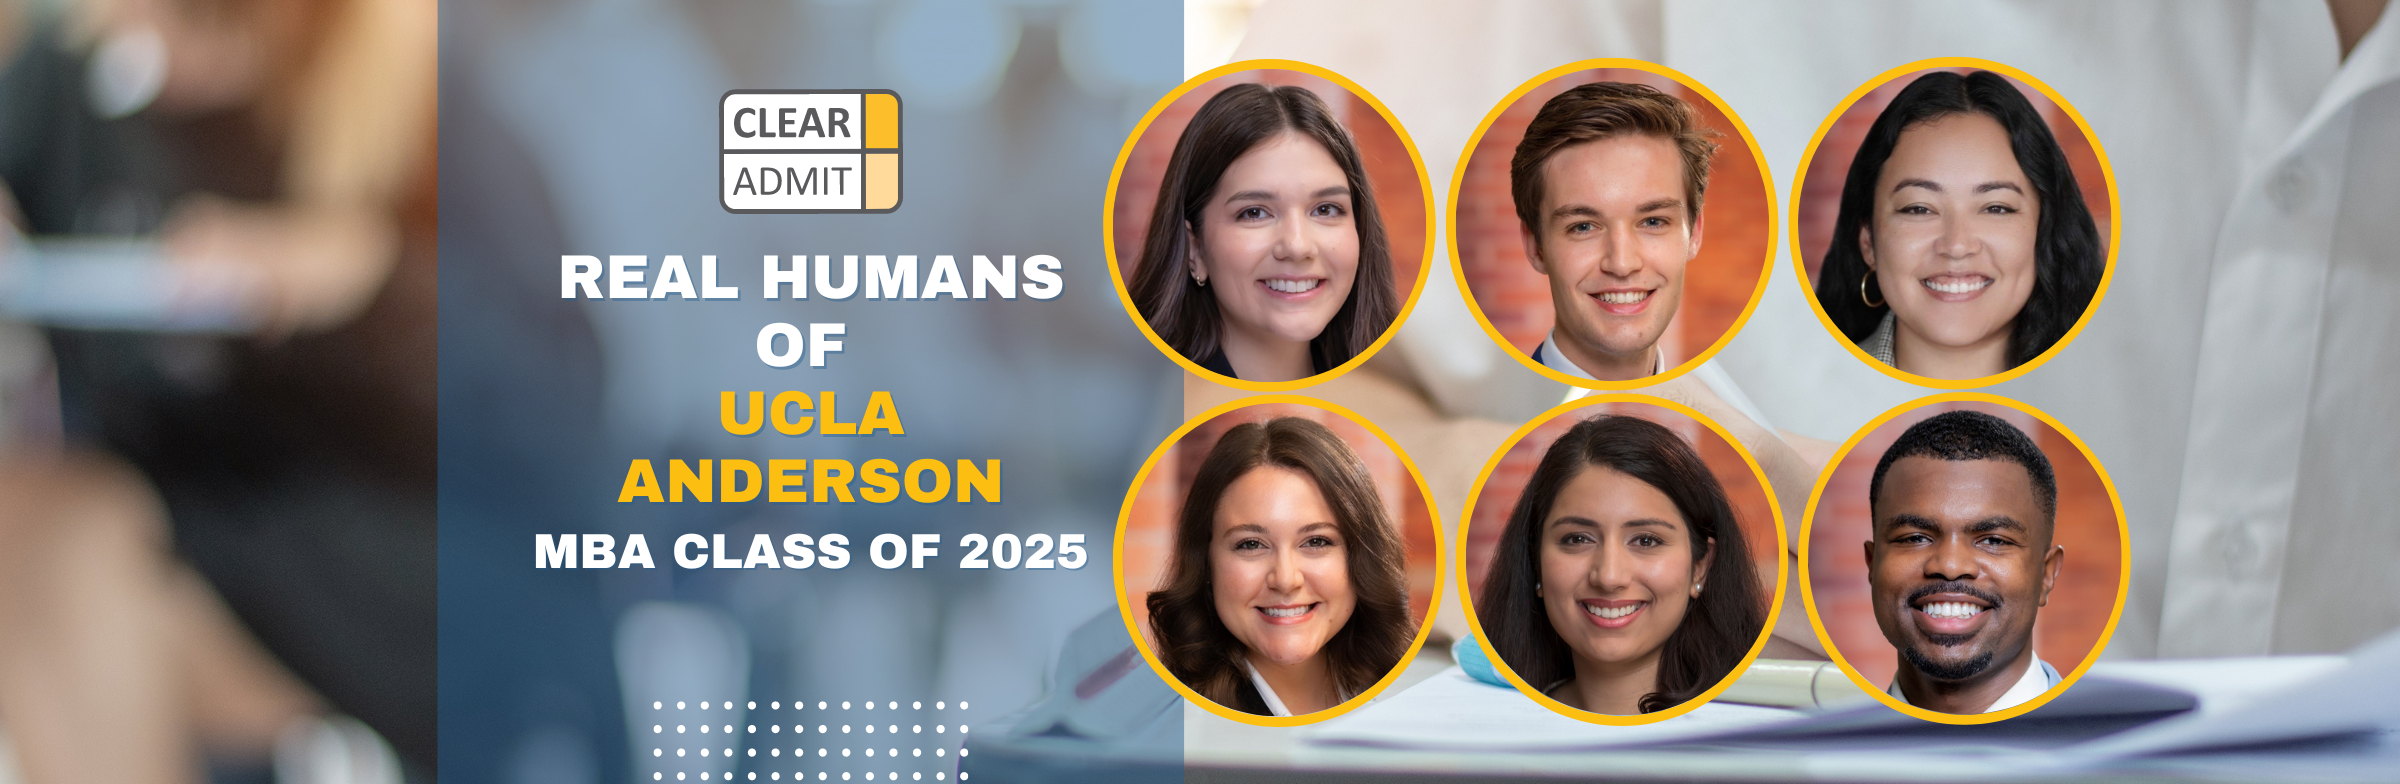 Image for Real Humans of the UCLA Anderson MBA Class of 2025